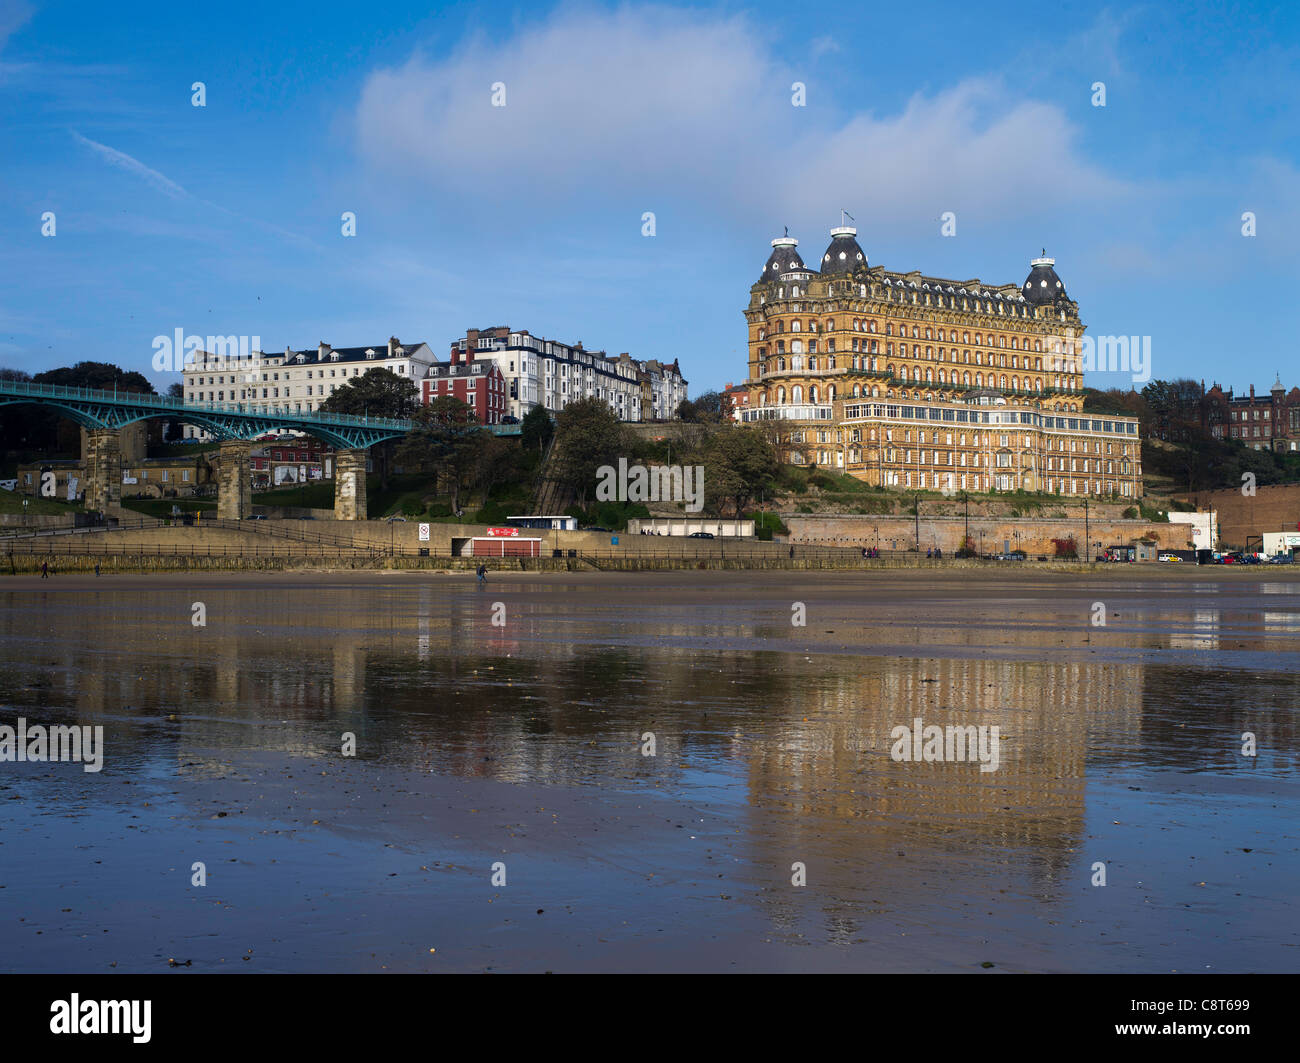 dh The Grand Hotel SCARBOROUGH NORTH YORKSHIRE South Bay englisch Hotels am Meer in England Beach UK Waterfront Stadt Stockfoto